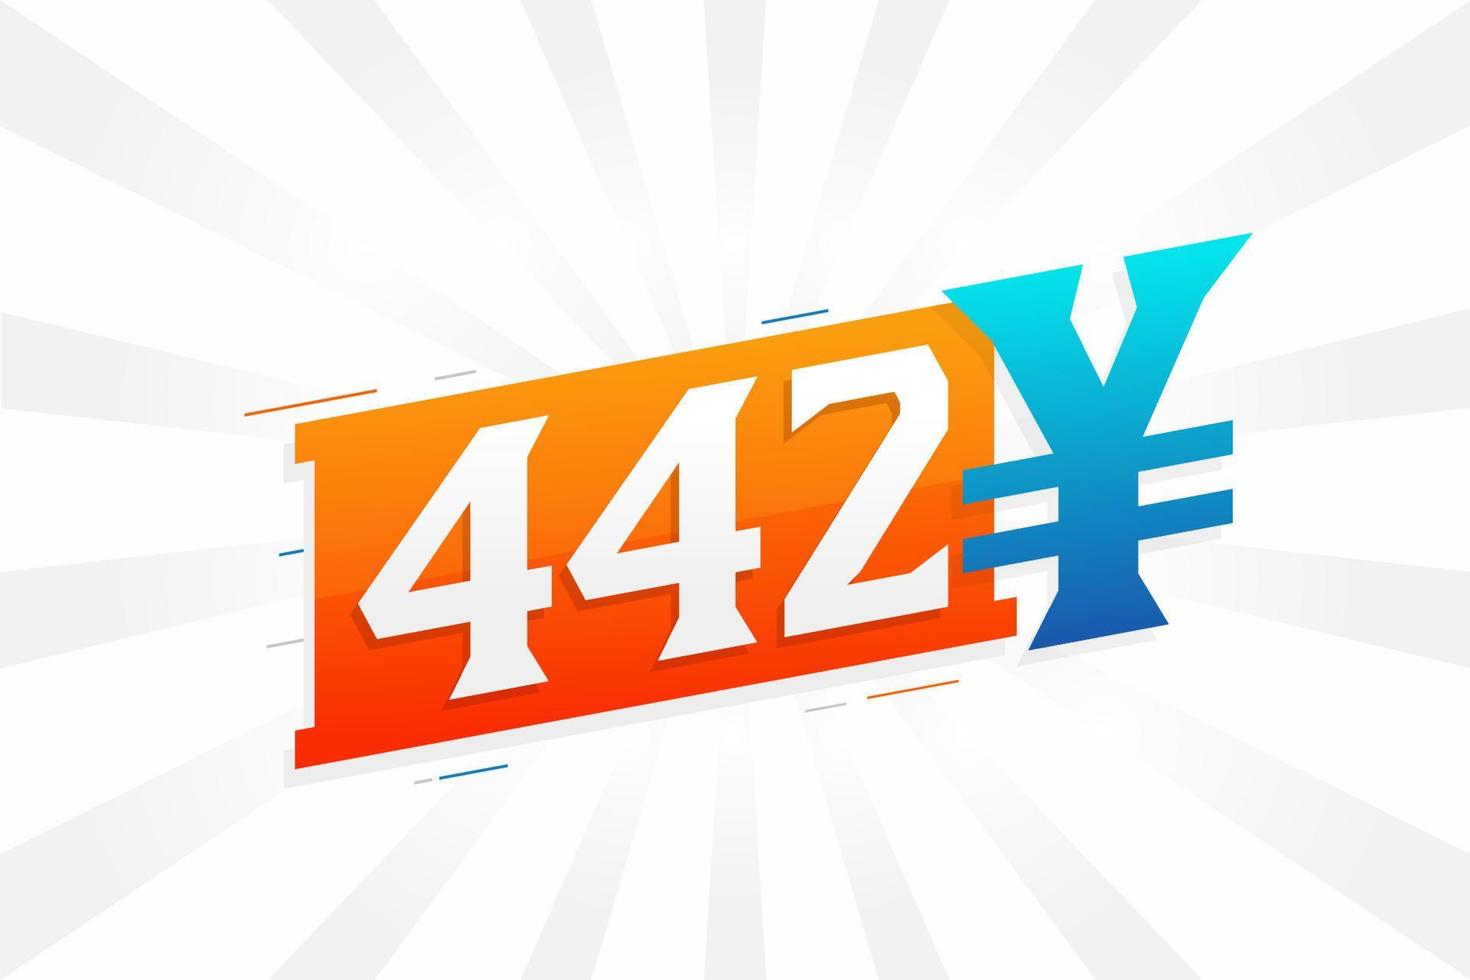 442 Yuan Chinese currency vector text symbol. 442 Yen Japanese currency Money stock vector